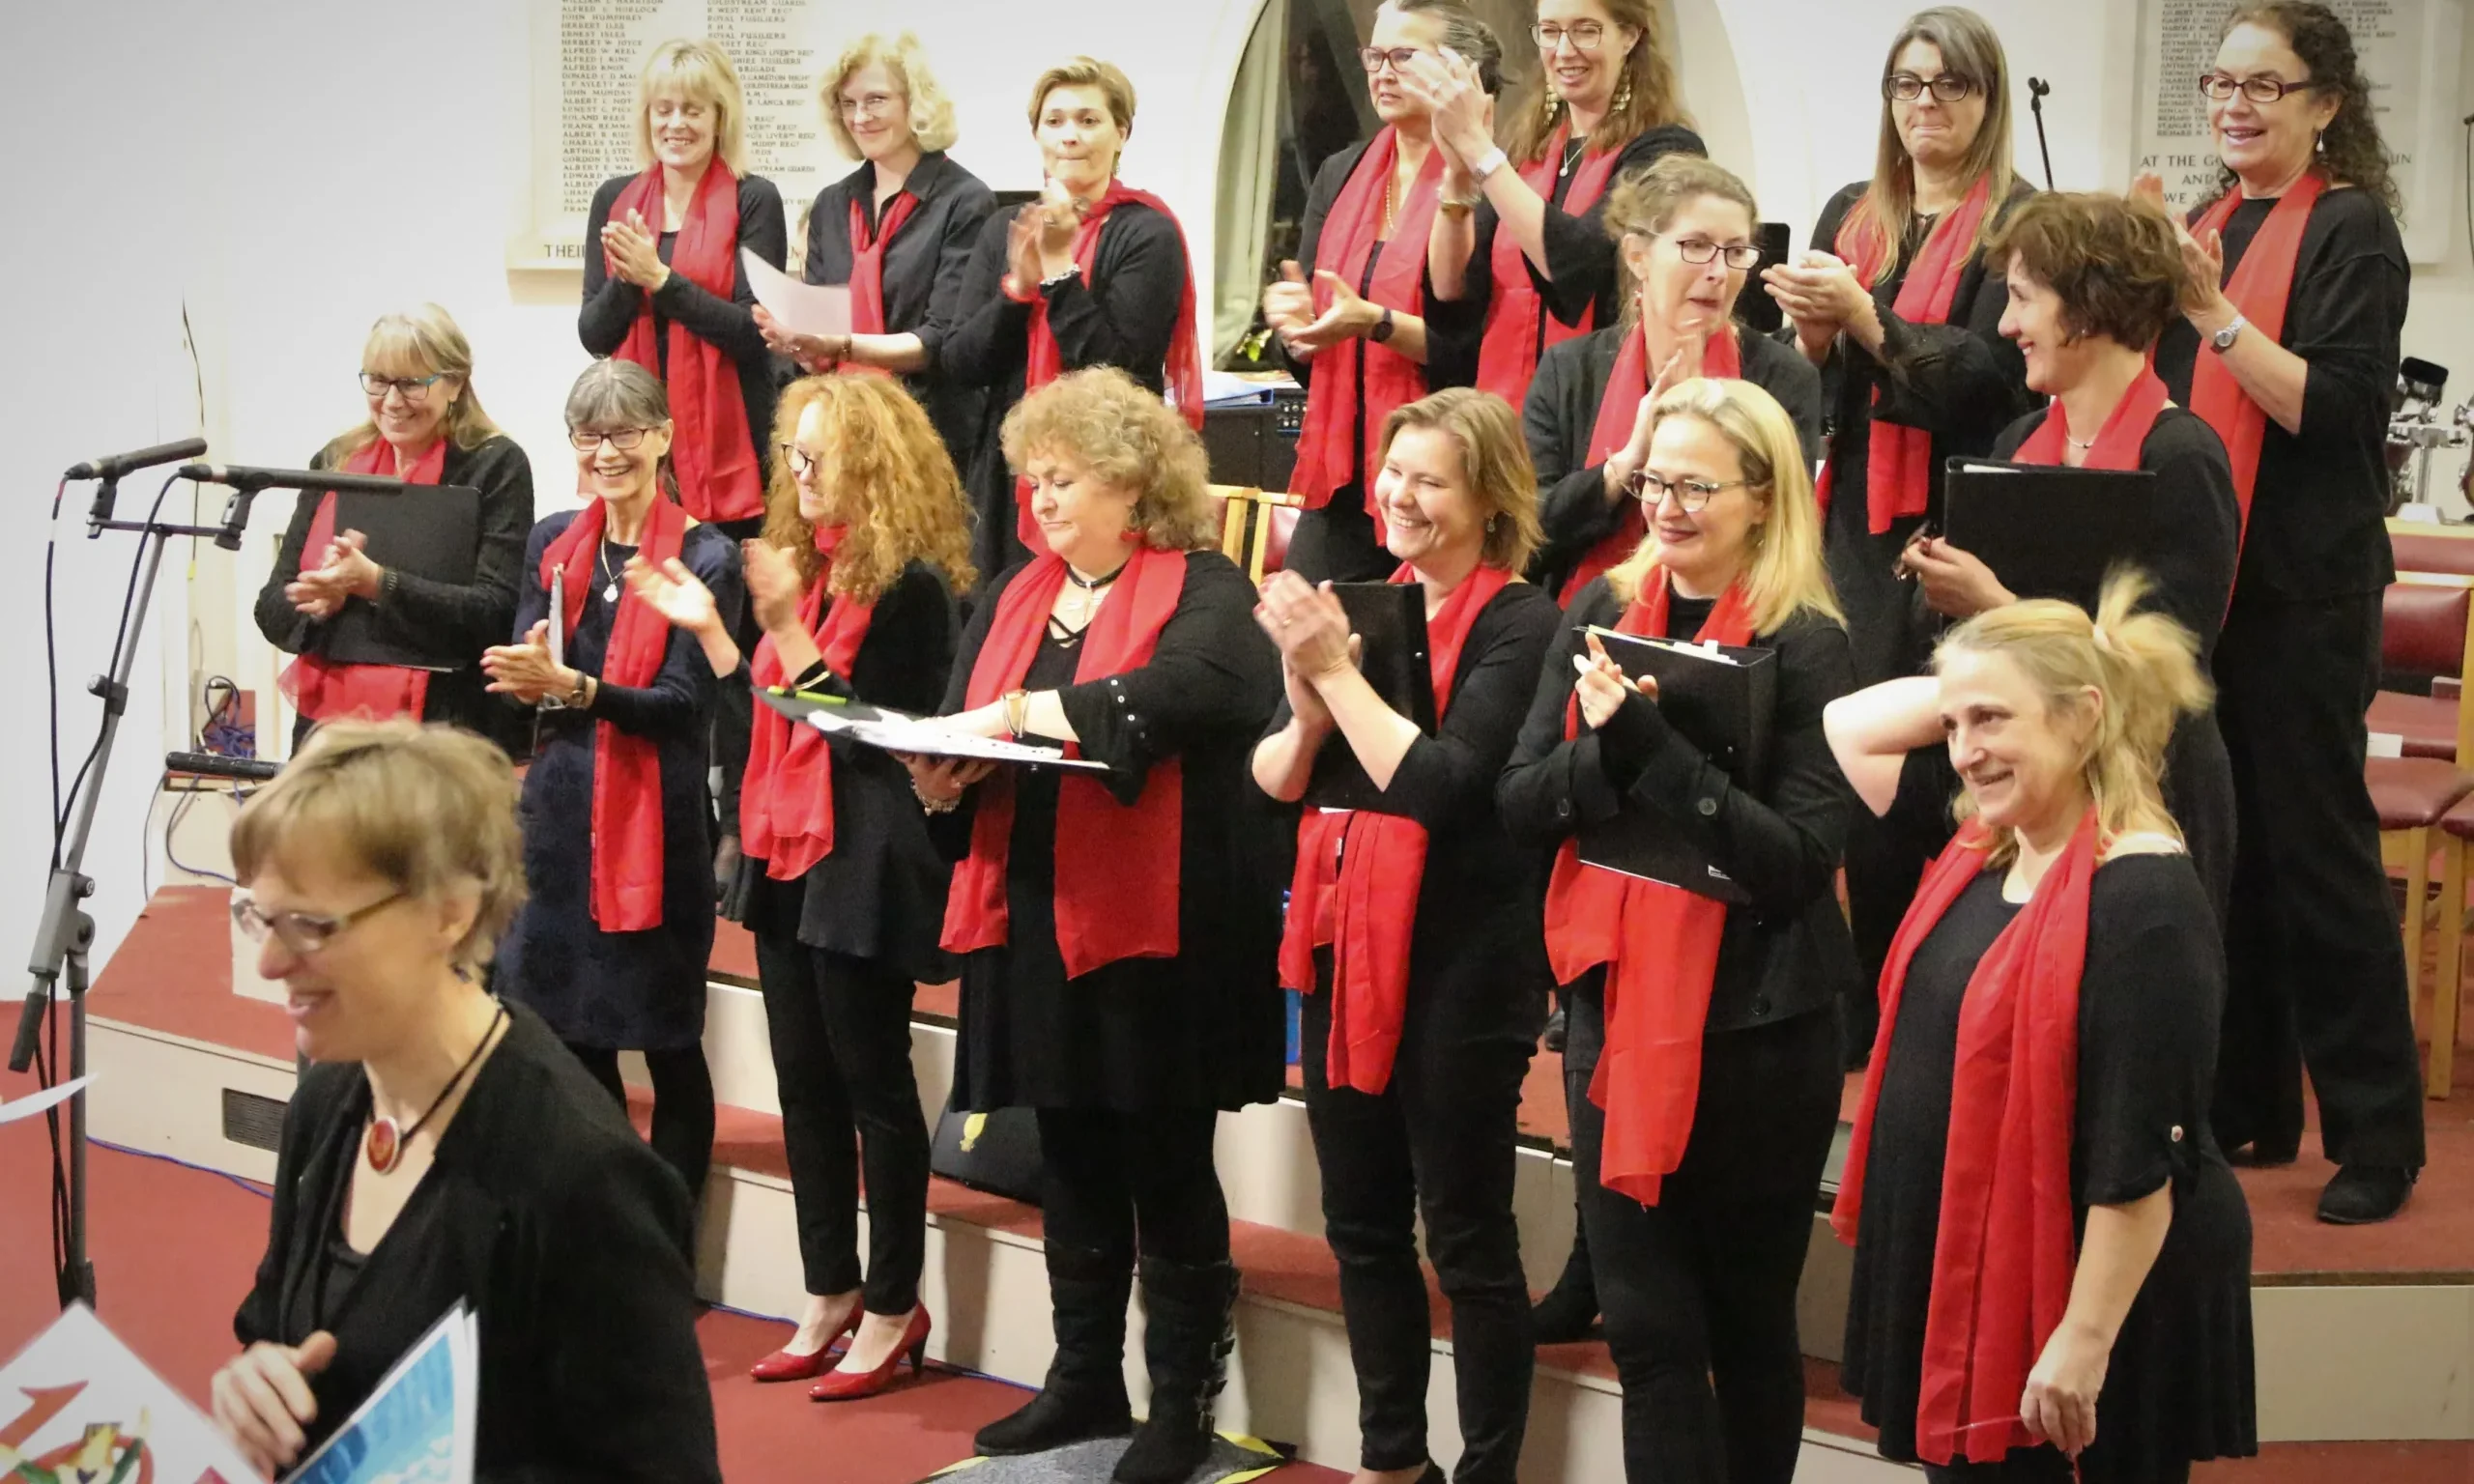 Group of female singers in red and black attire harmonizing together.